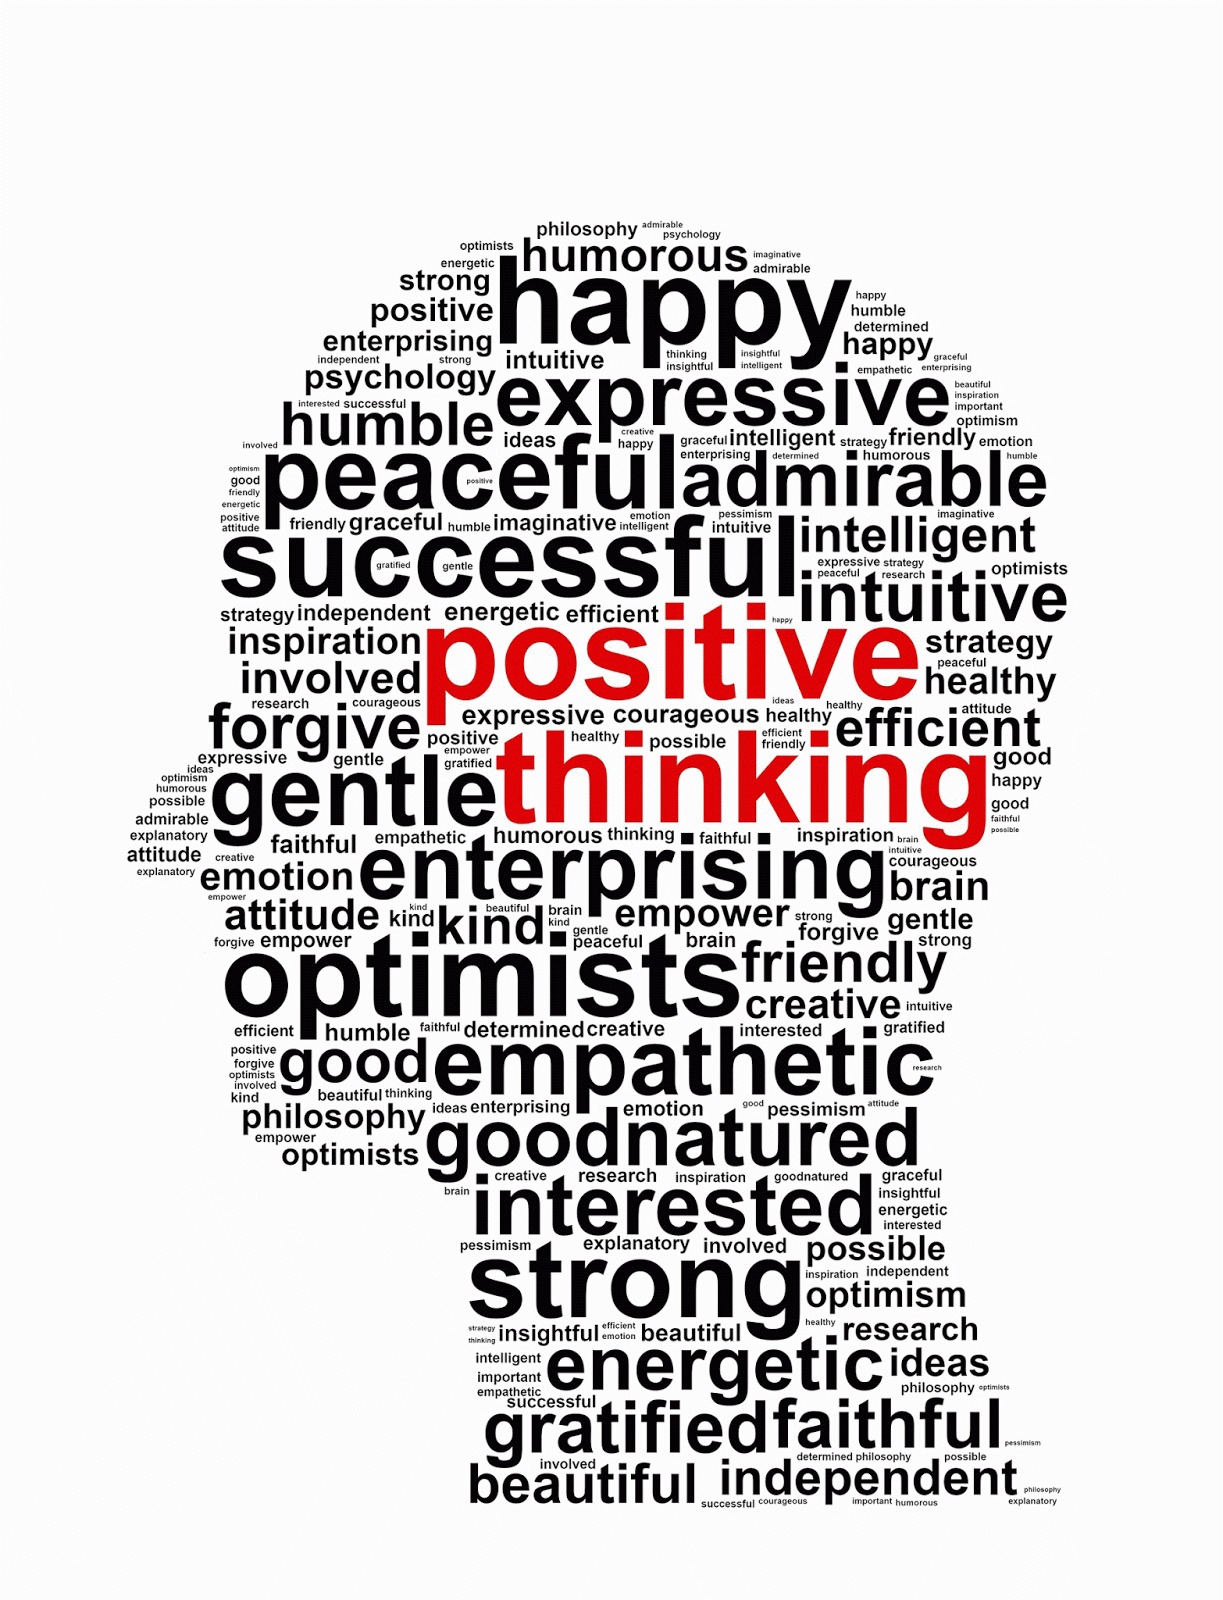 Positive Thoughts In Brain - 1223x1600 Wallpaper 